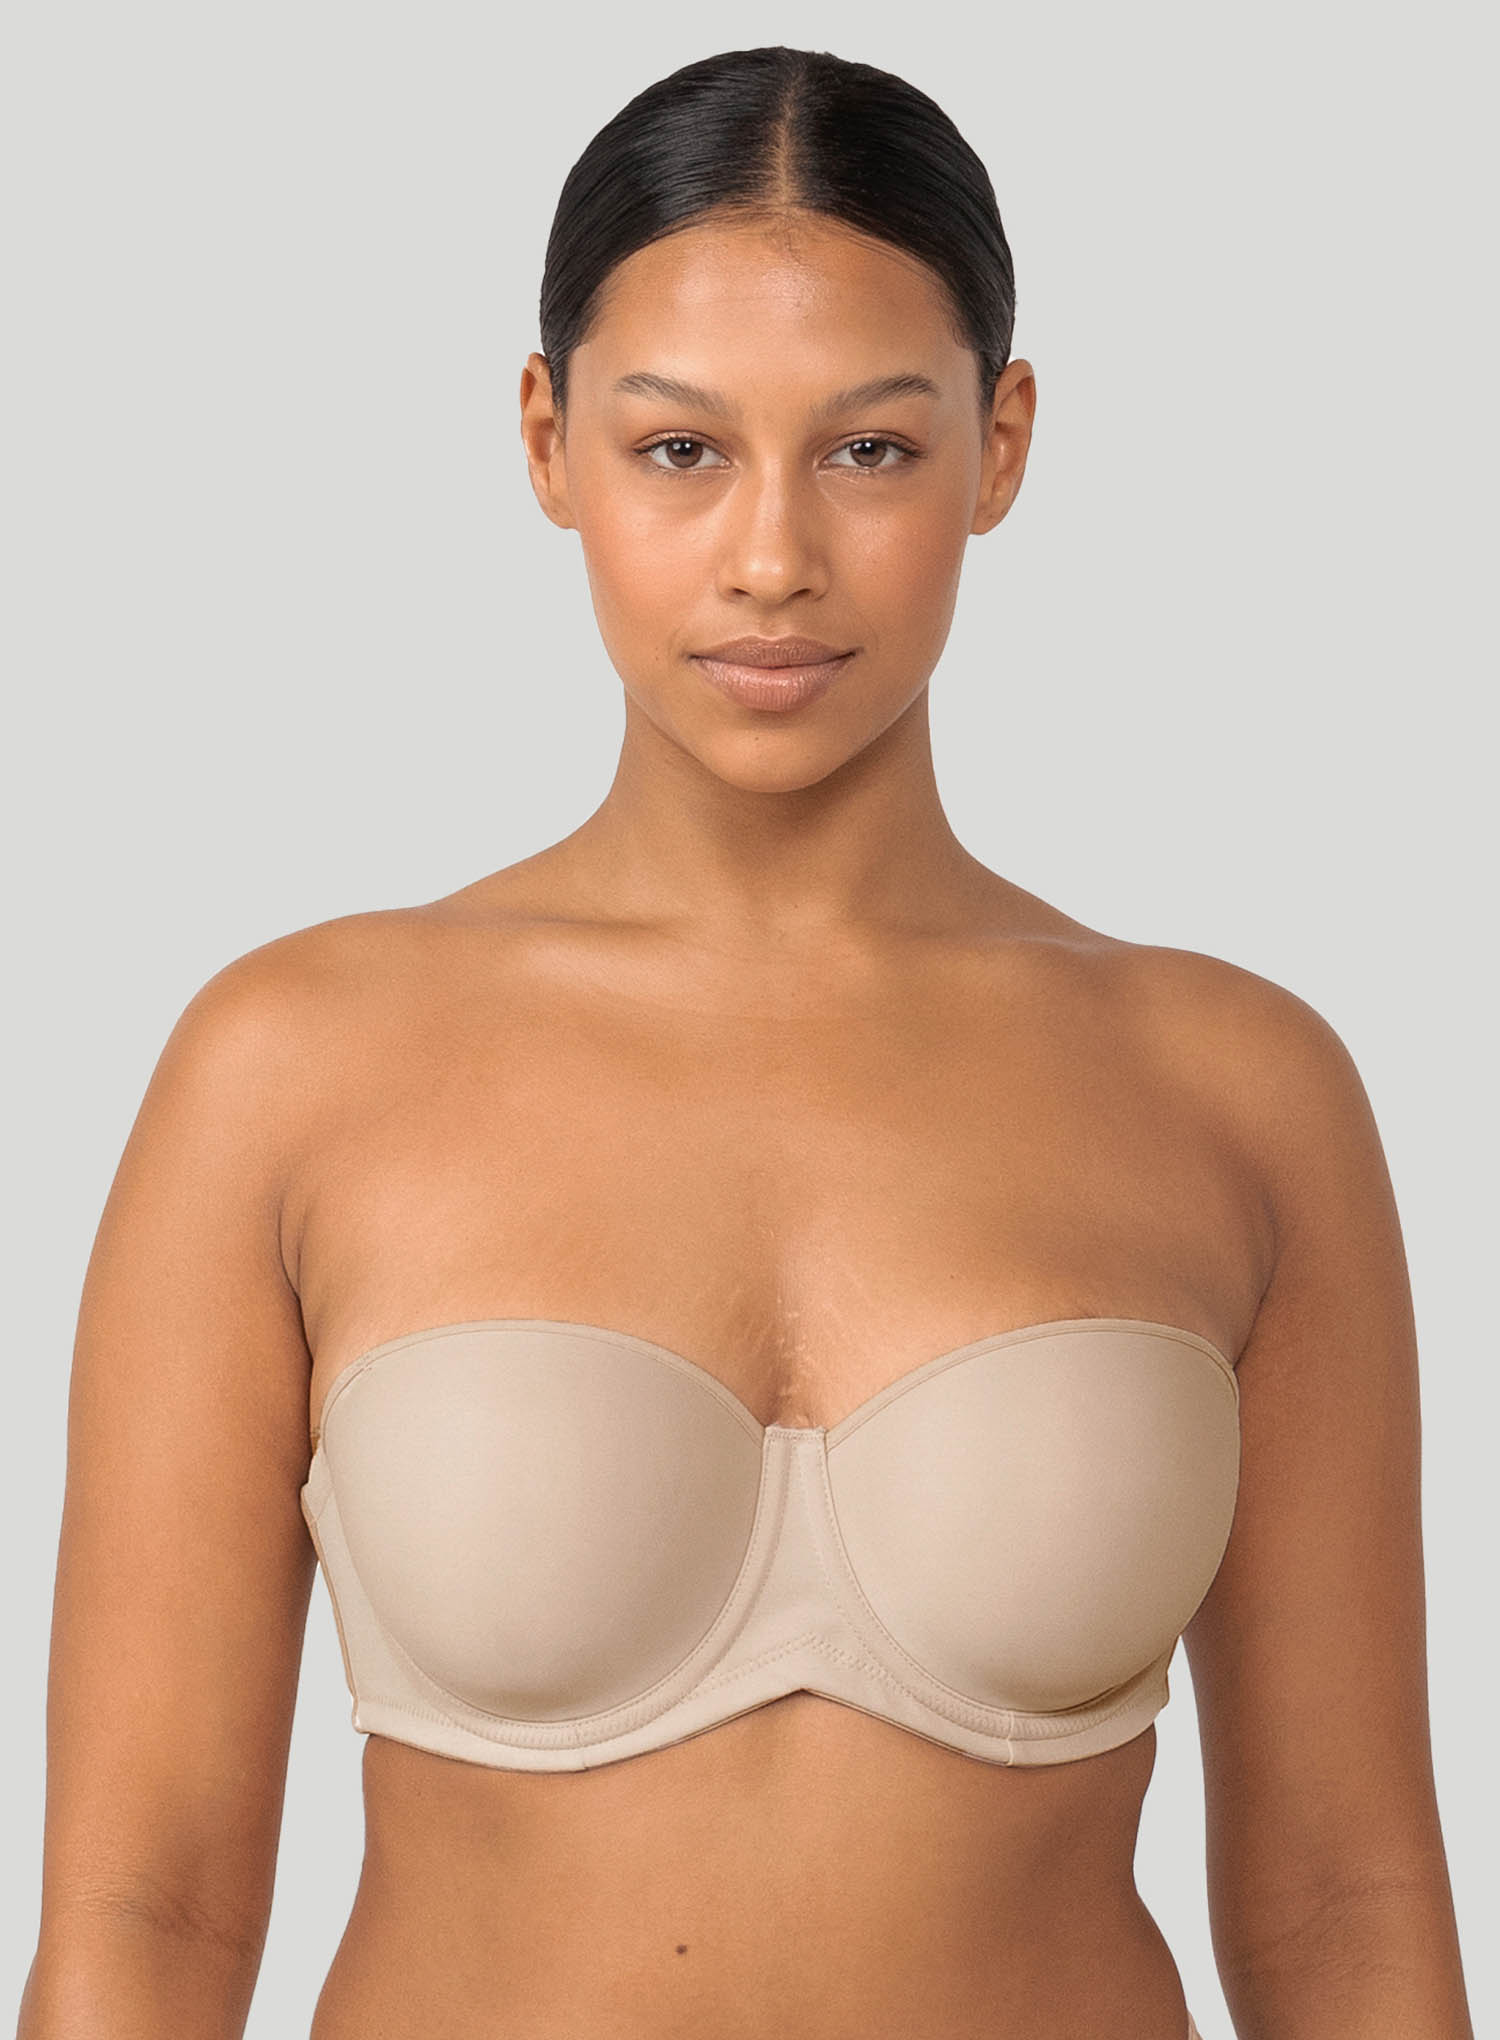 Piftif Seamless Strapless Tube Bra Combo Pack for Women/Girls (Non Padded,  Non Wired),super stretch